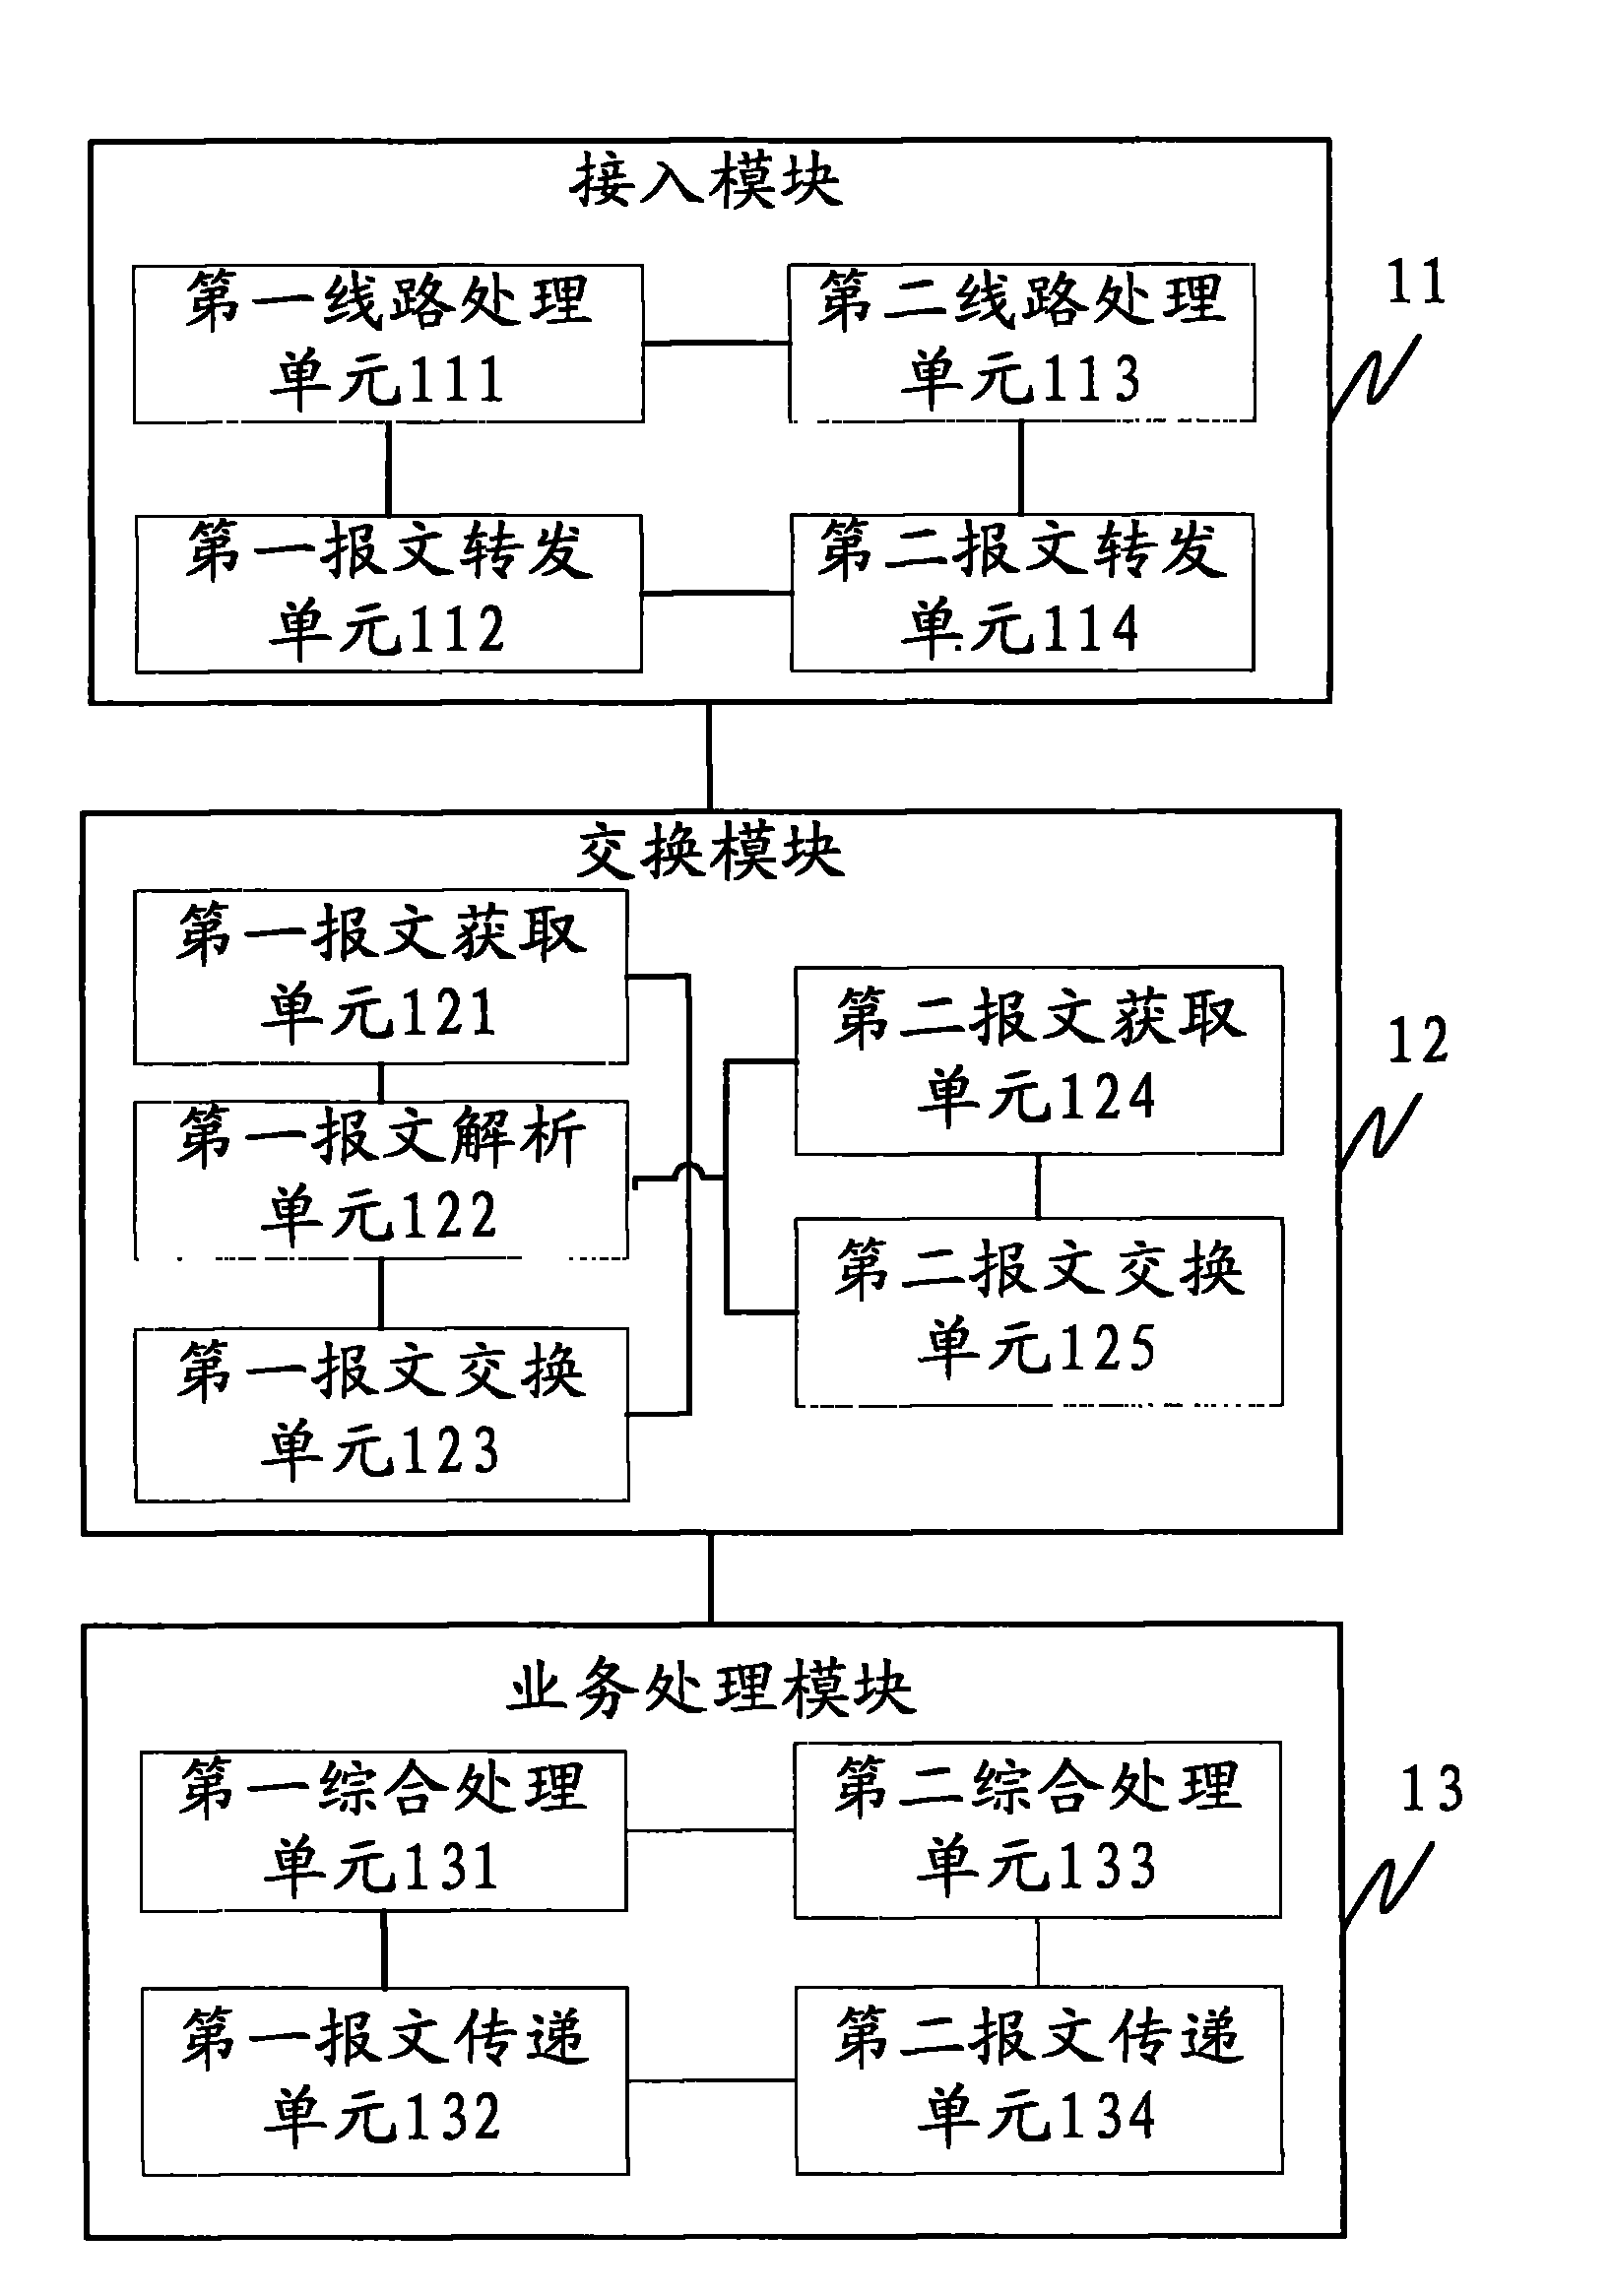 System and method for processing access network